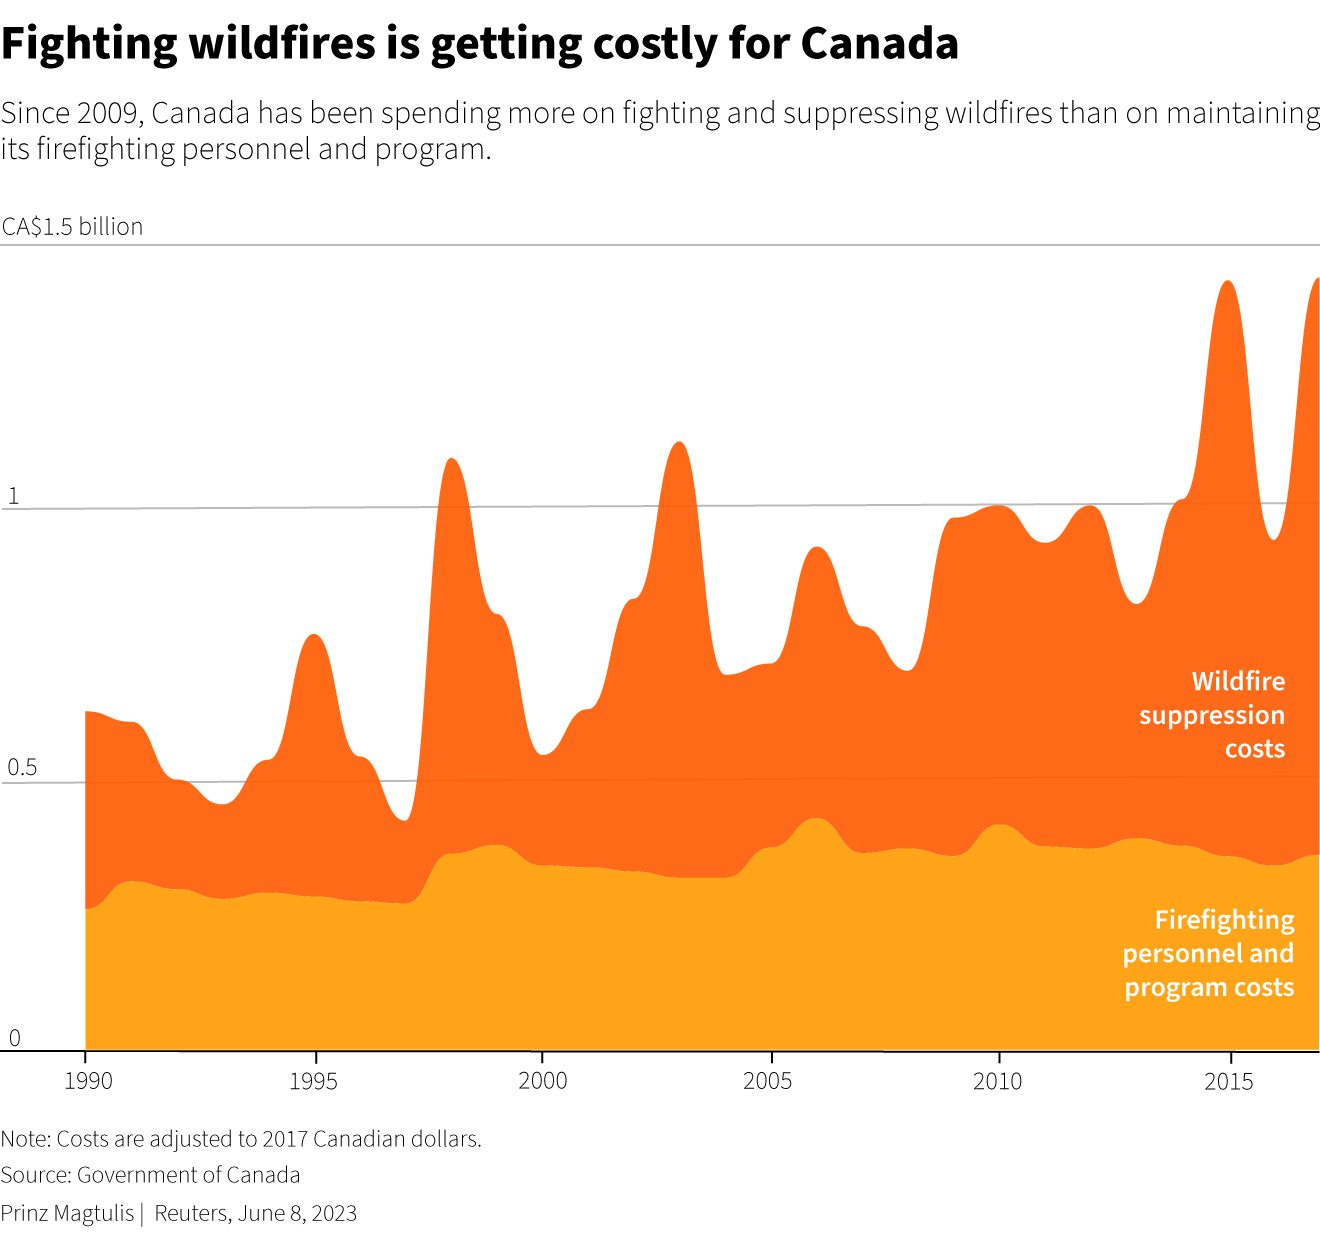 Since 2009, Canada has spent more on fighting and extinguishing wildfires than on maintaining firefighting personnel and its program.